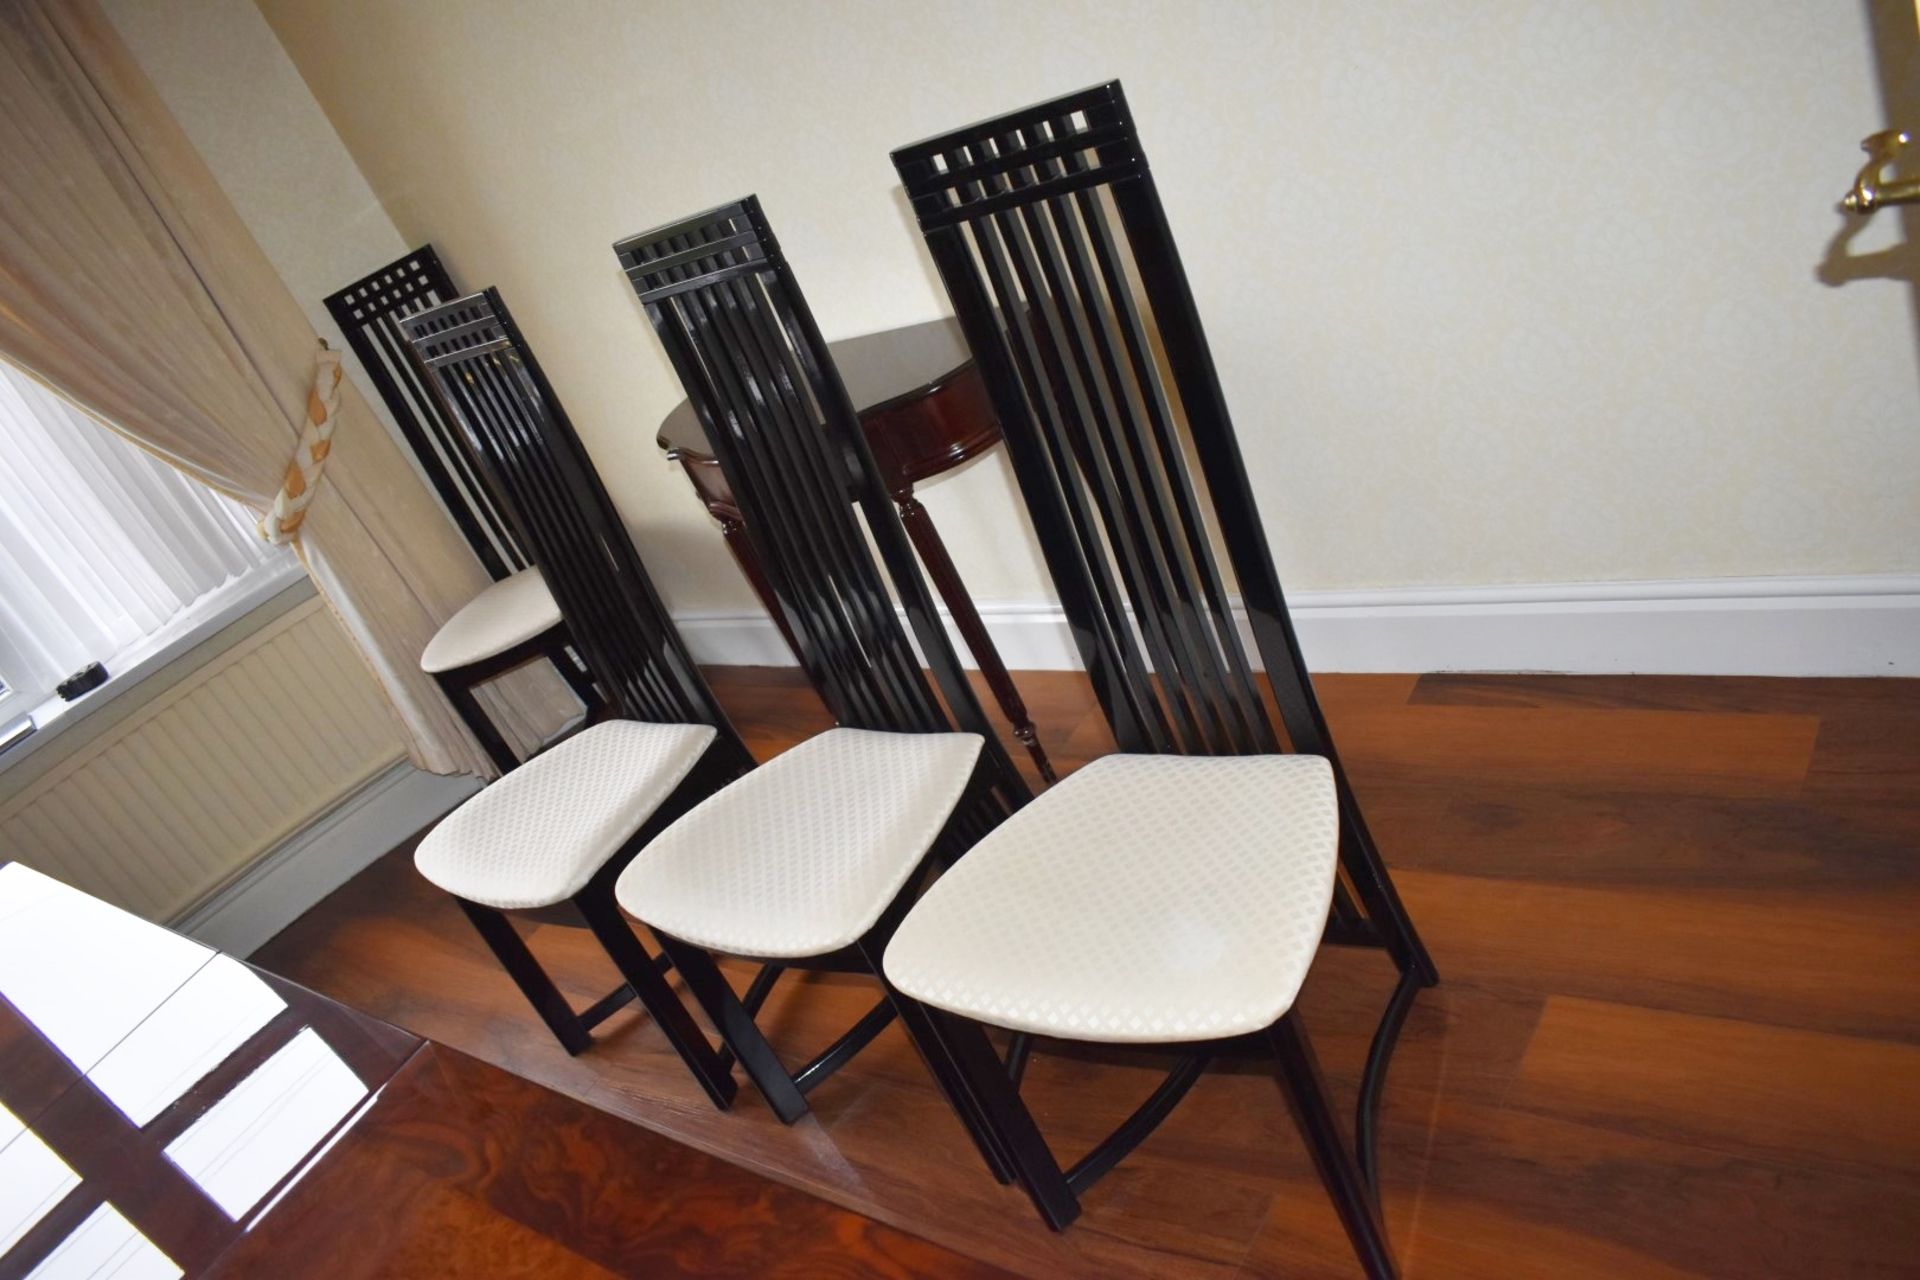 8 x High Back Dining Chairs - Set of Eight Elegant High Back Oriental Style Chairs With Black Finish - Image 3 of 11